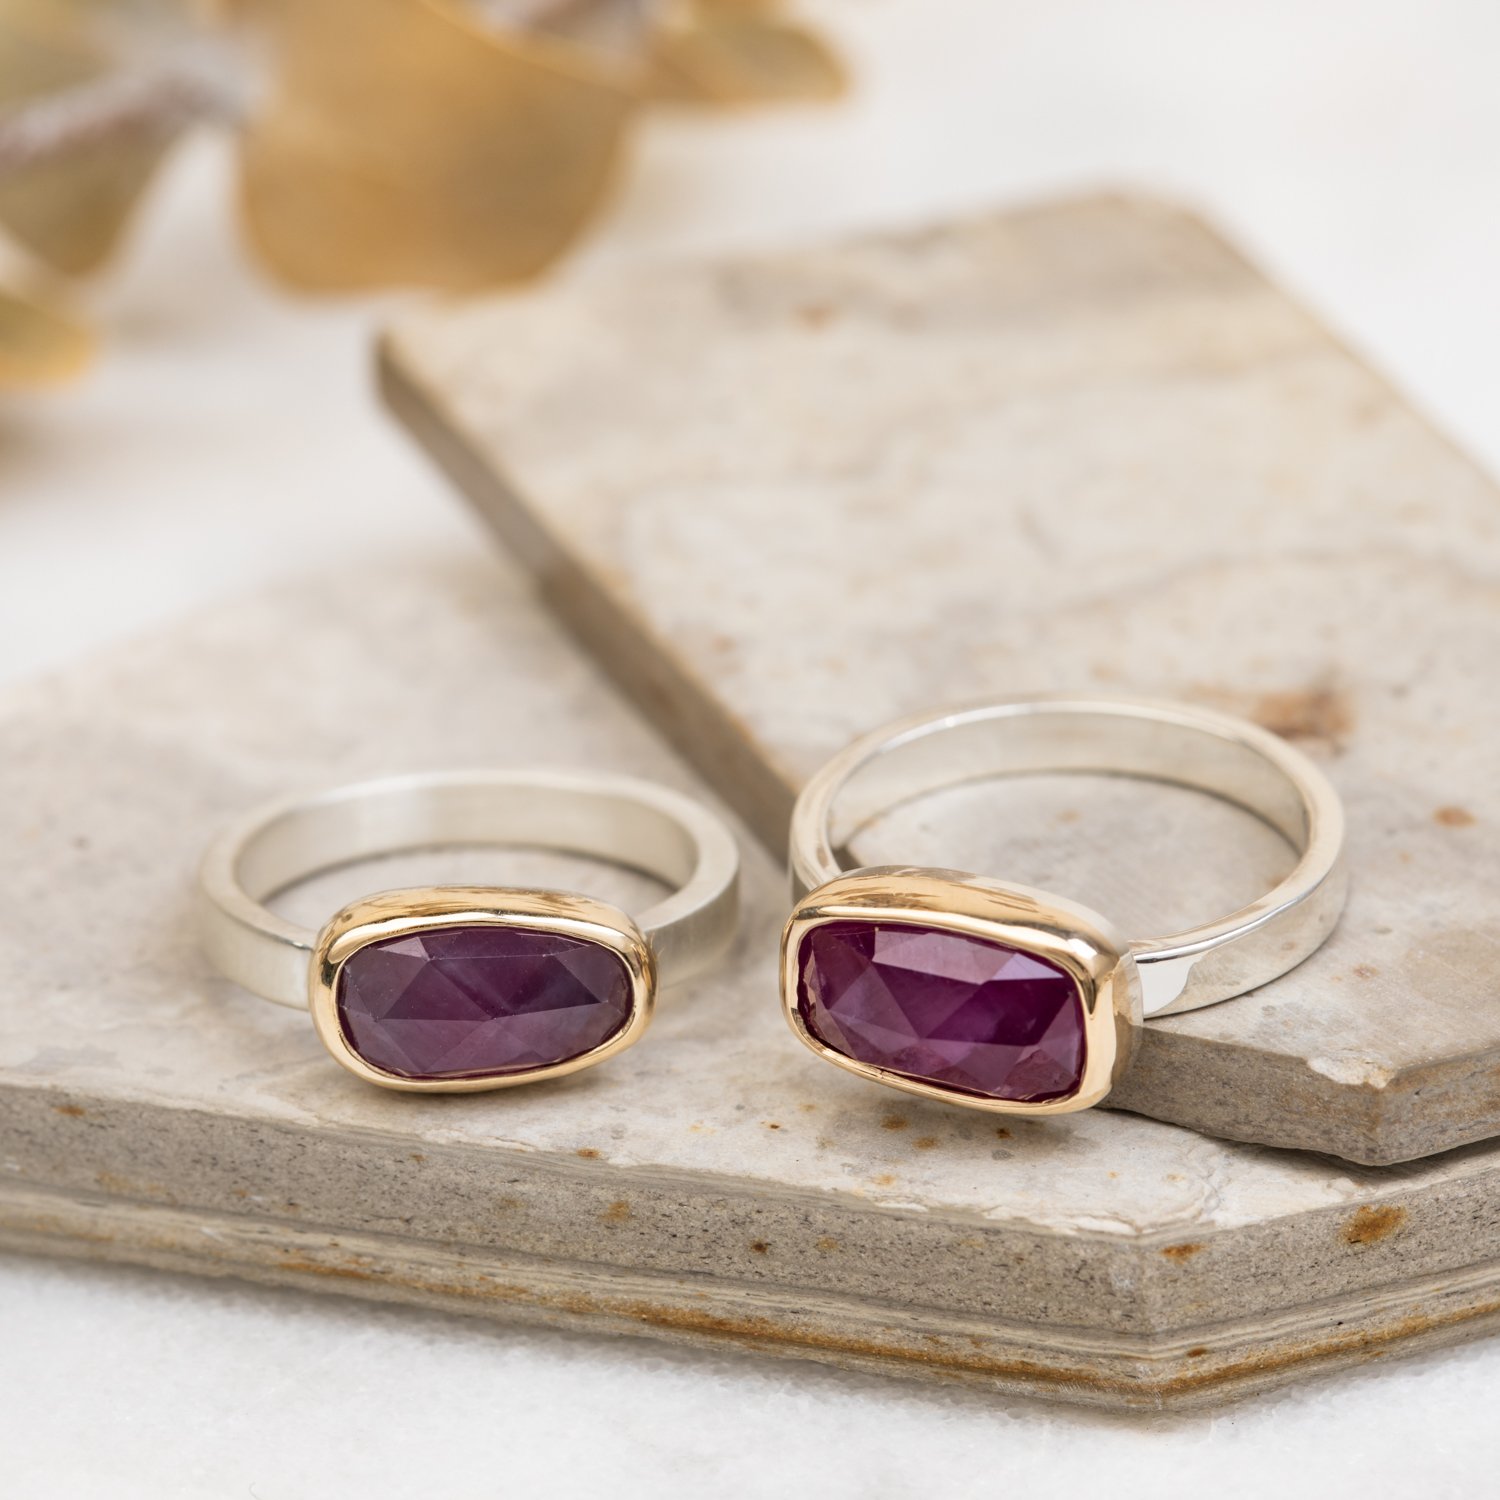 matching-ruby-rings-with-brushed-and-high-polished-bands.jpg